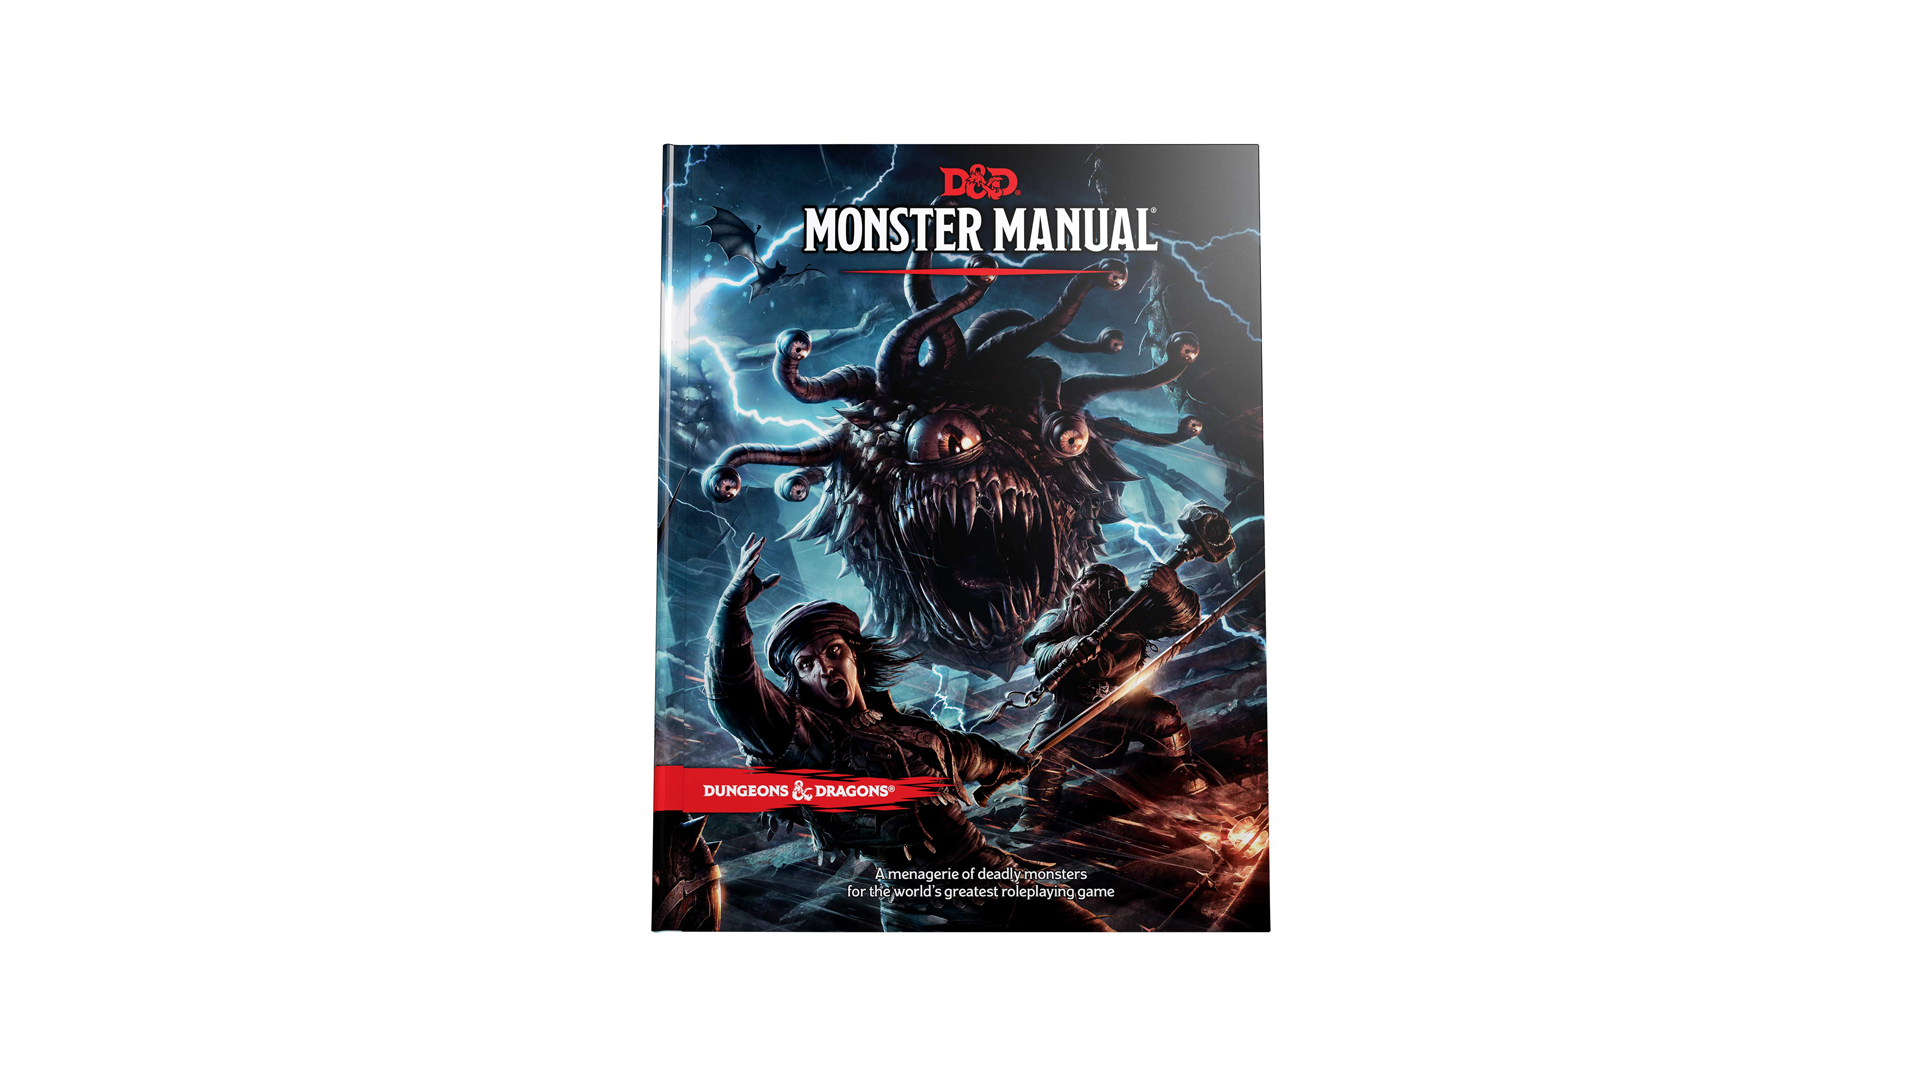 Dungeons & Dragons 5E book Monster Manual